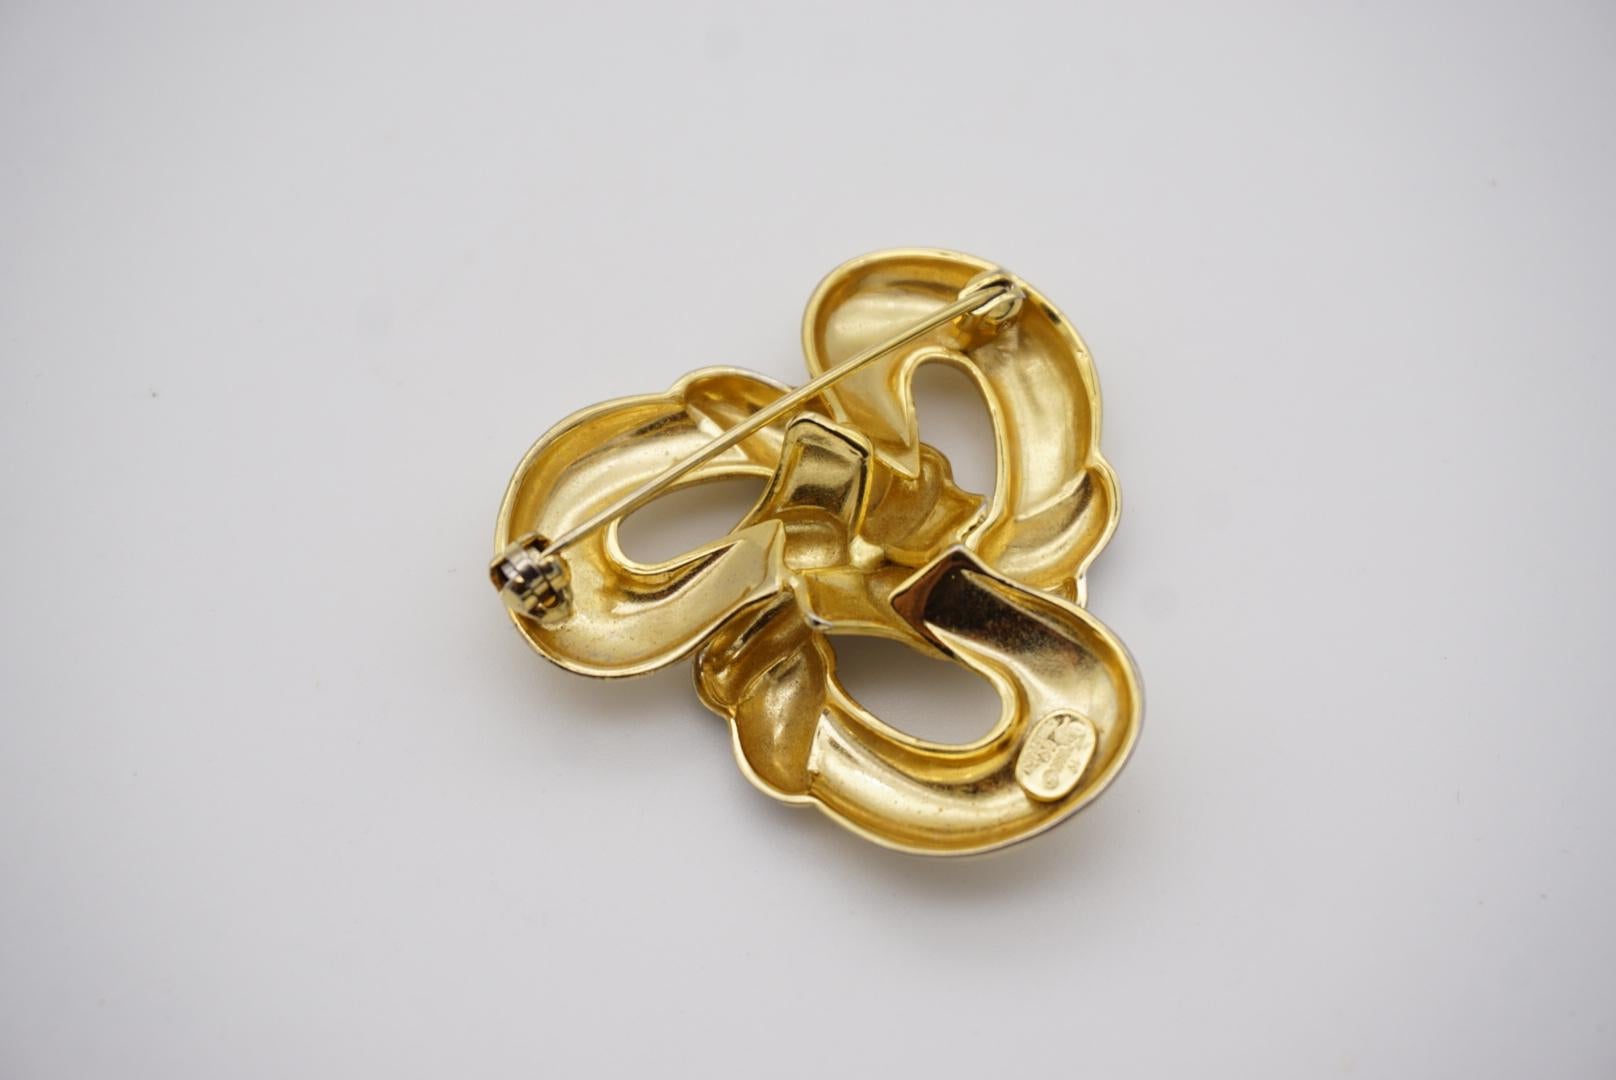 Christian Dior GROSSE 1969 Vintage Trio Knot Bows Swirl Twist Gold Silver Brooch For Sale 5